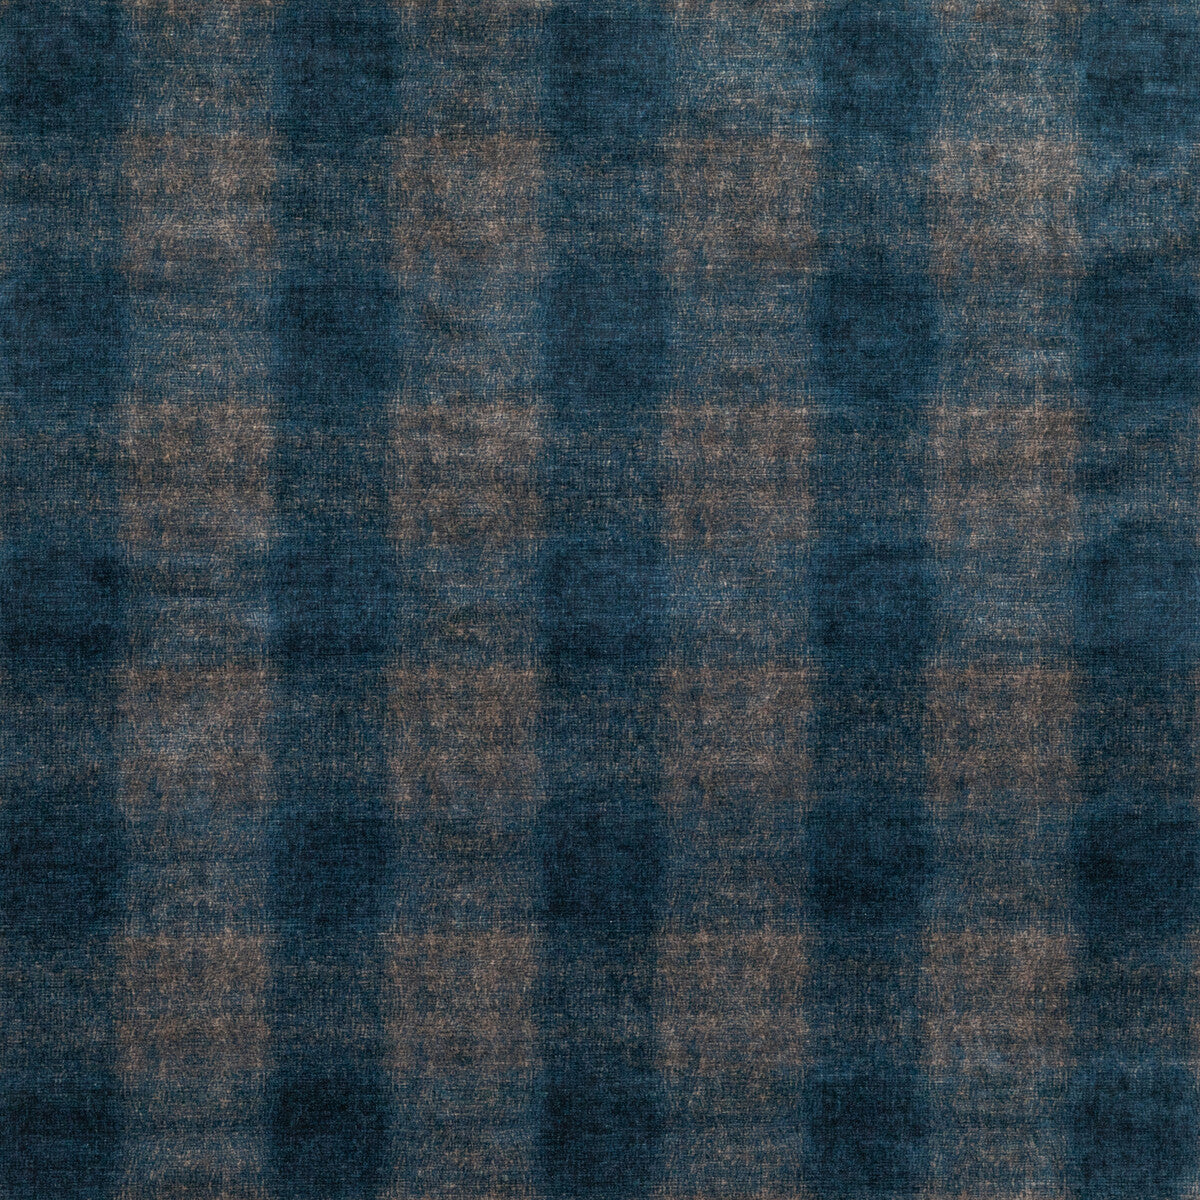 Highland Check fabric in indigo color - pattern FD314.H10.0 - by Mulberry in the Modern Country Velvets collection